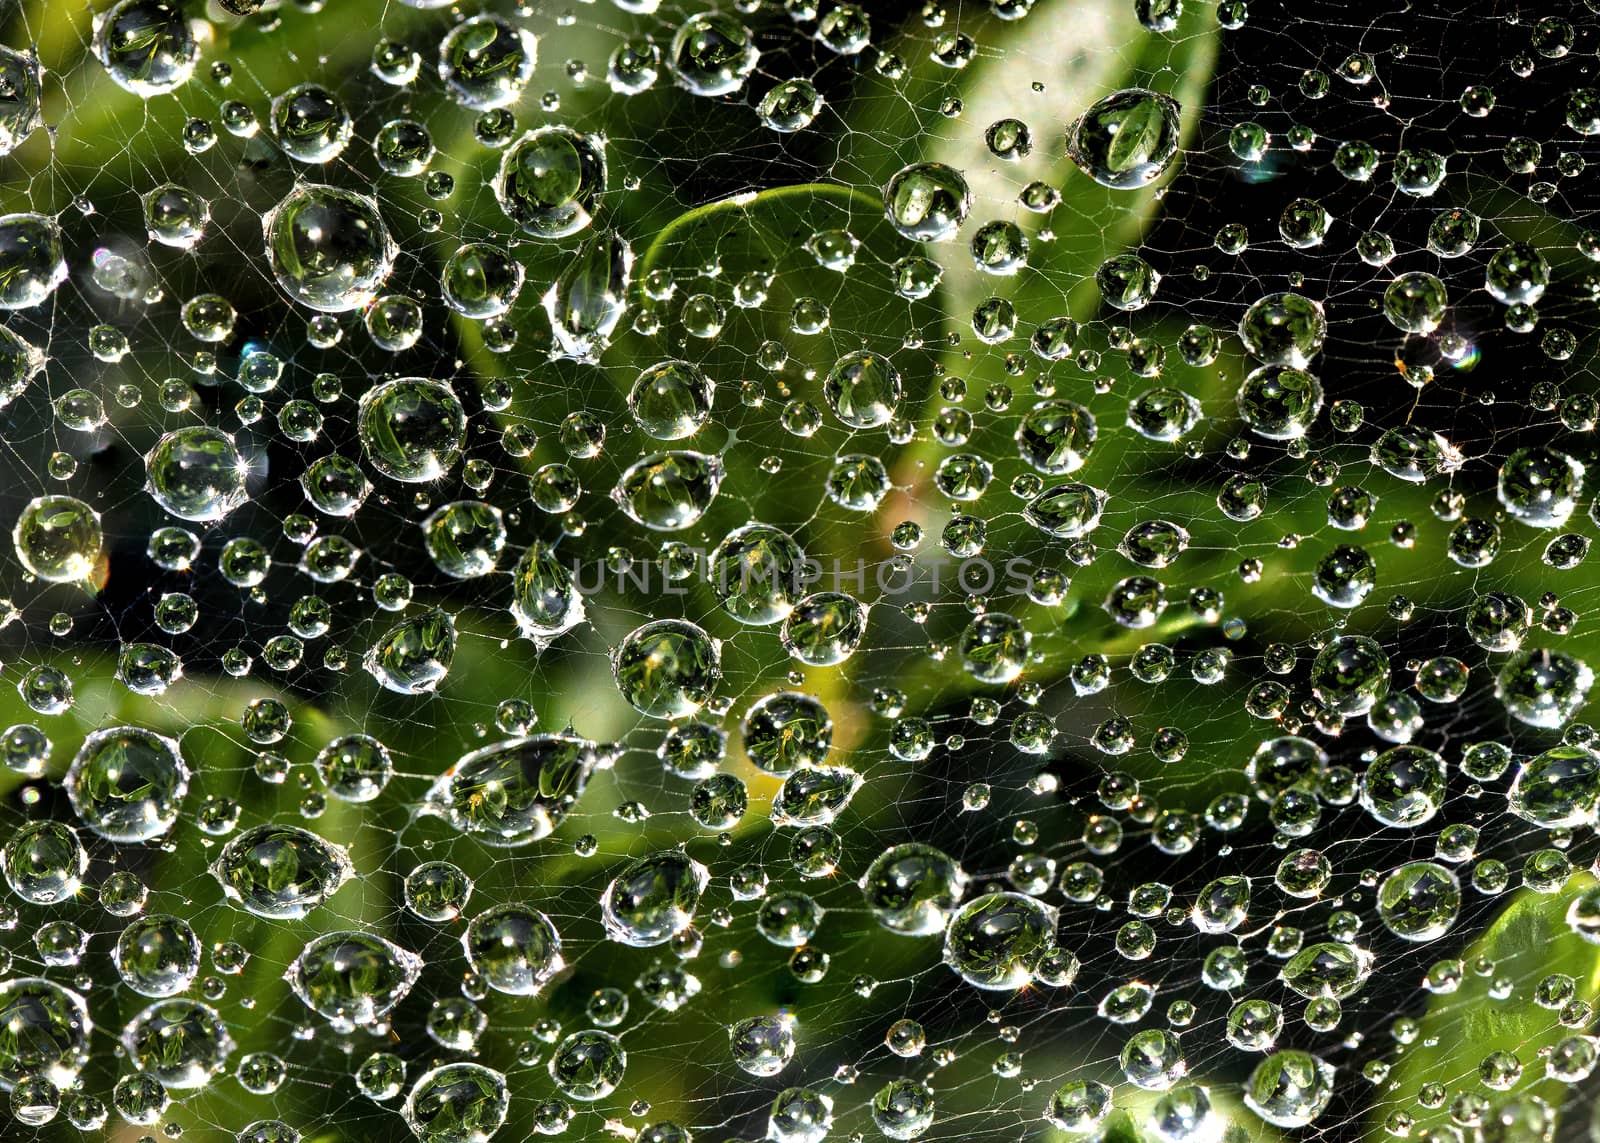 Spider Web Close-up with Jewel-Like Dew Drops by CharlieFloyd